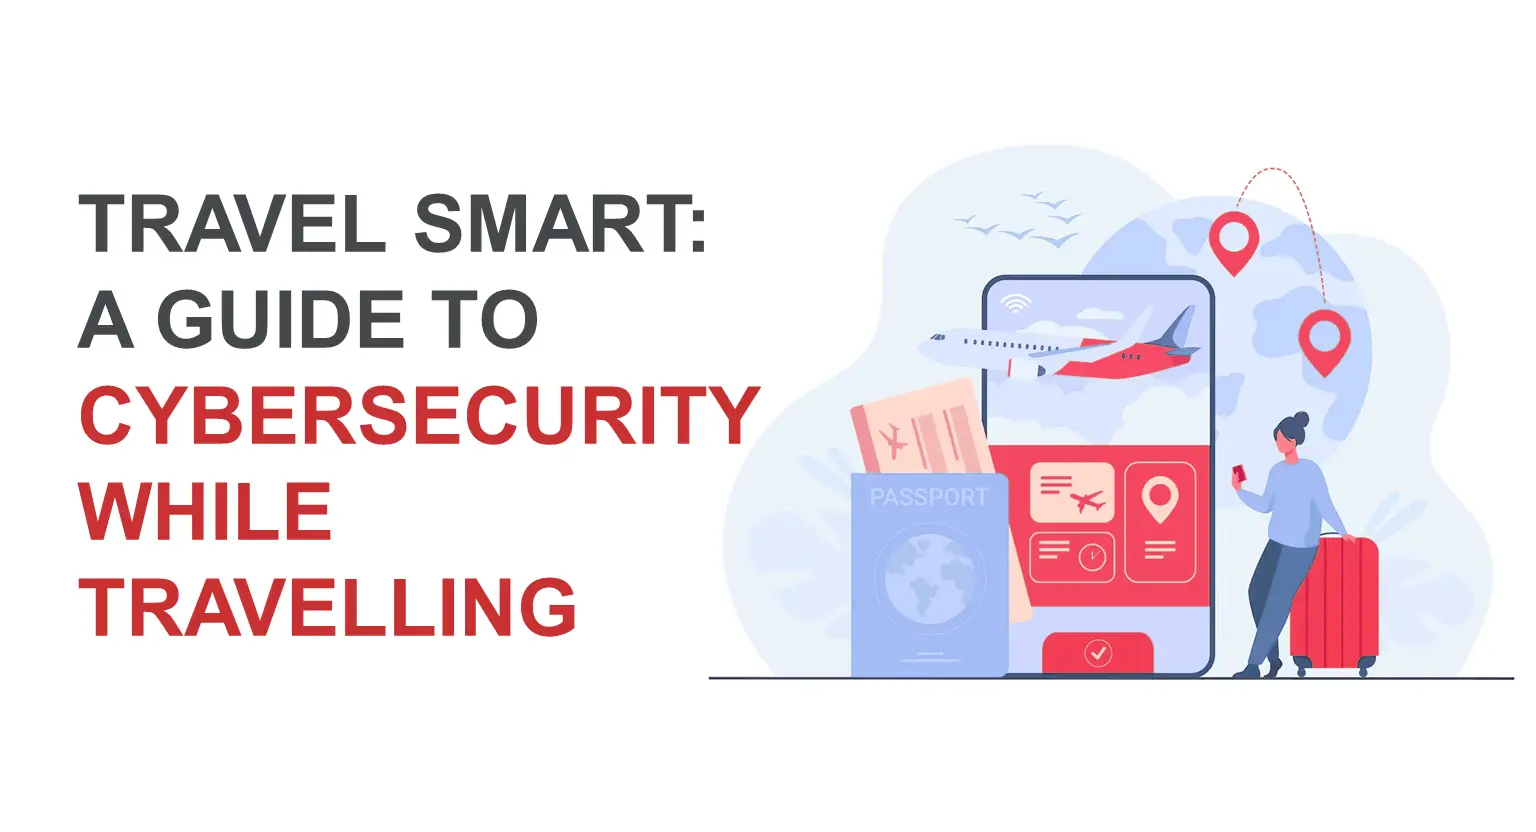 Travel Smart: A Guide to Cybersecurity While Travelling